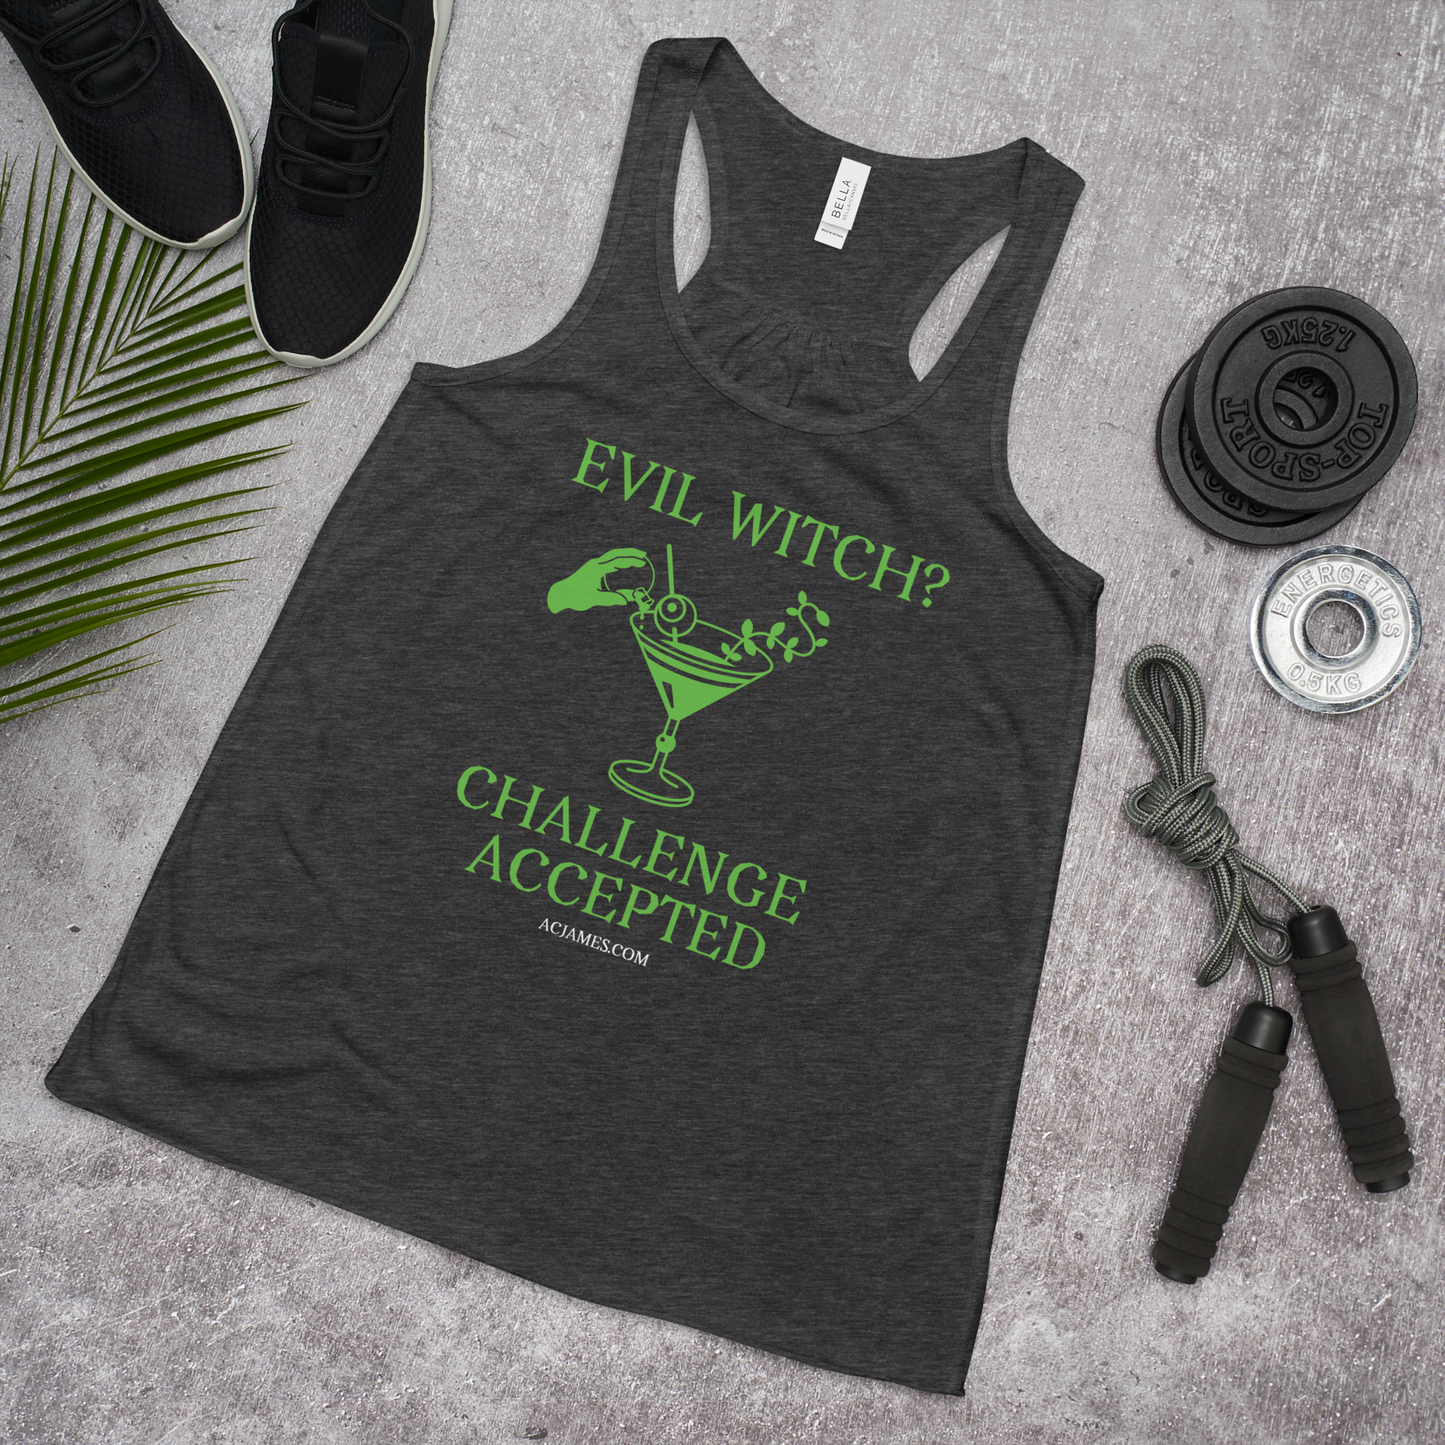 Evil Witch? Challenge Accepted Women's Flowy Racerback Tank